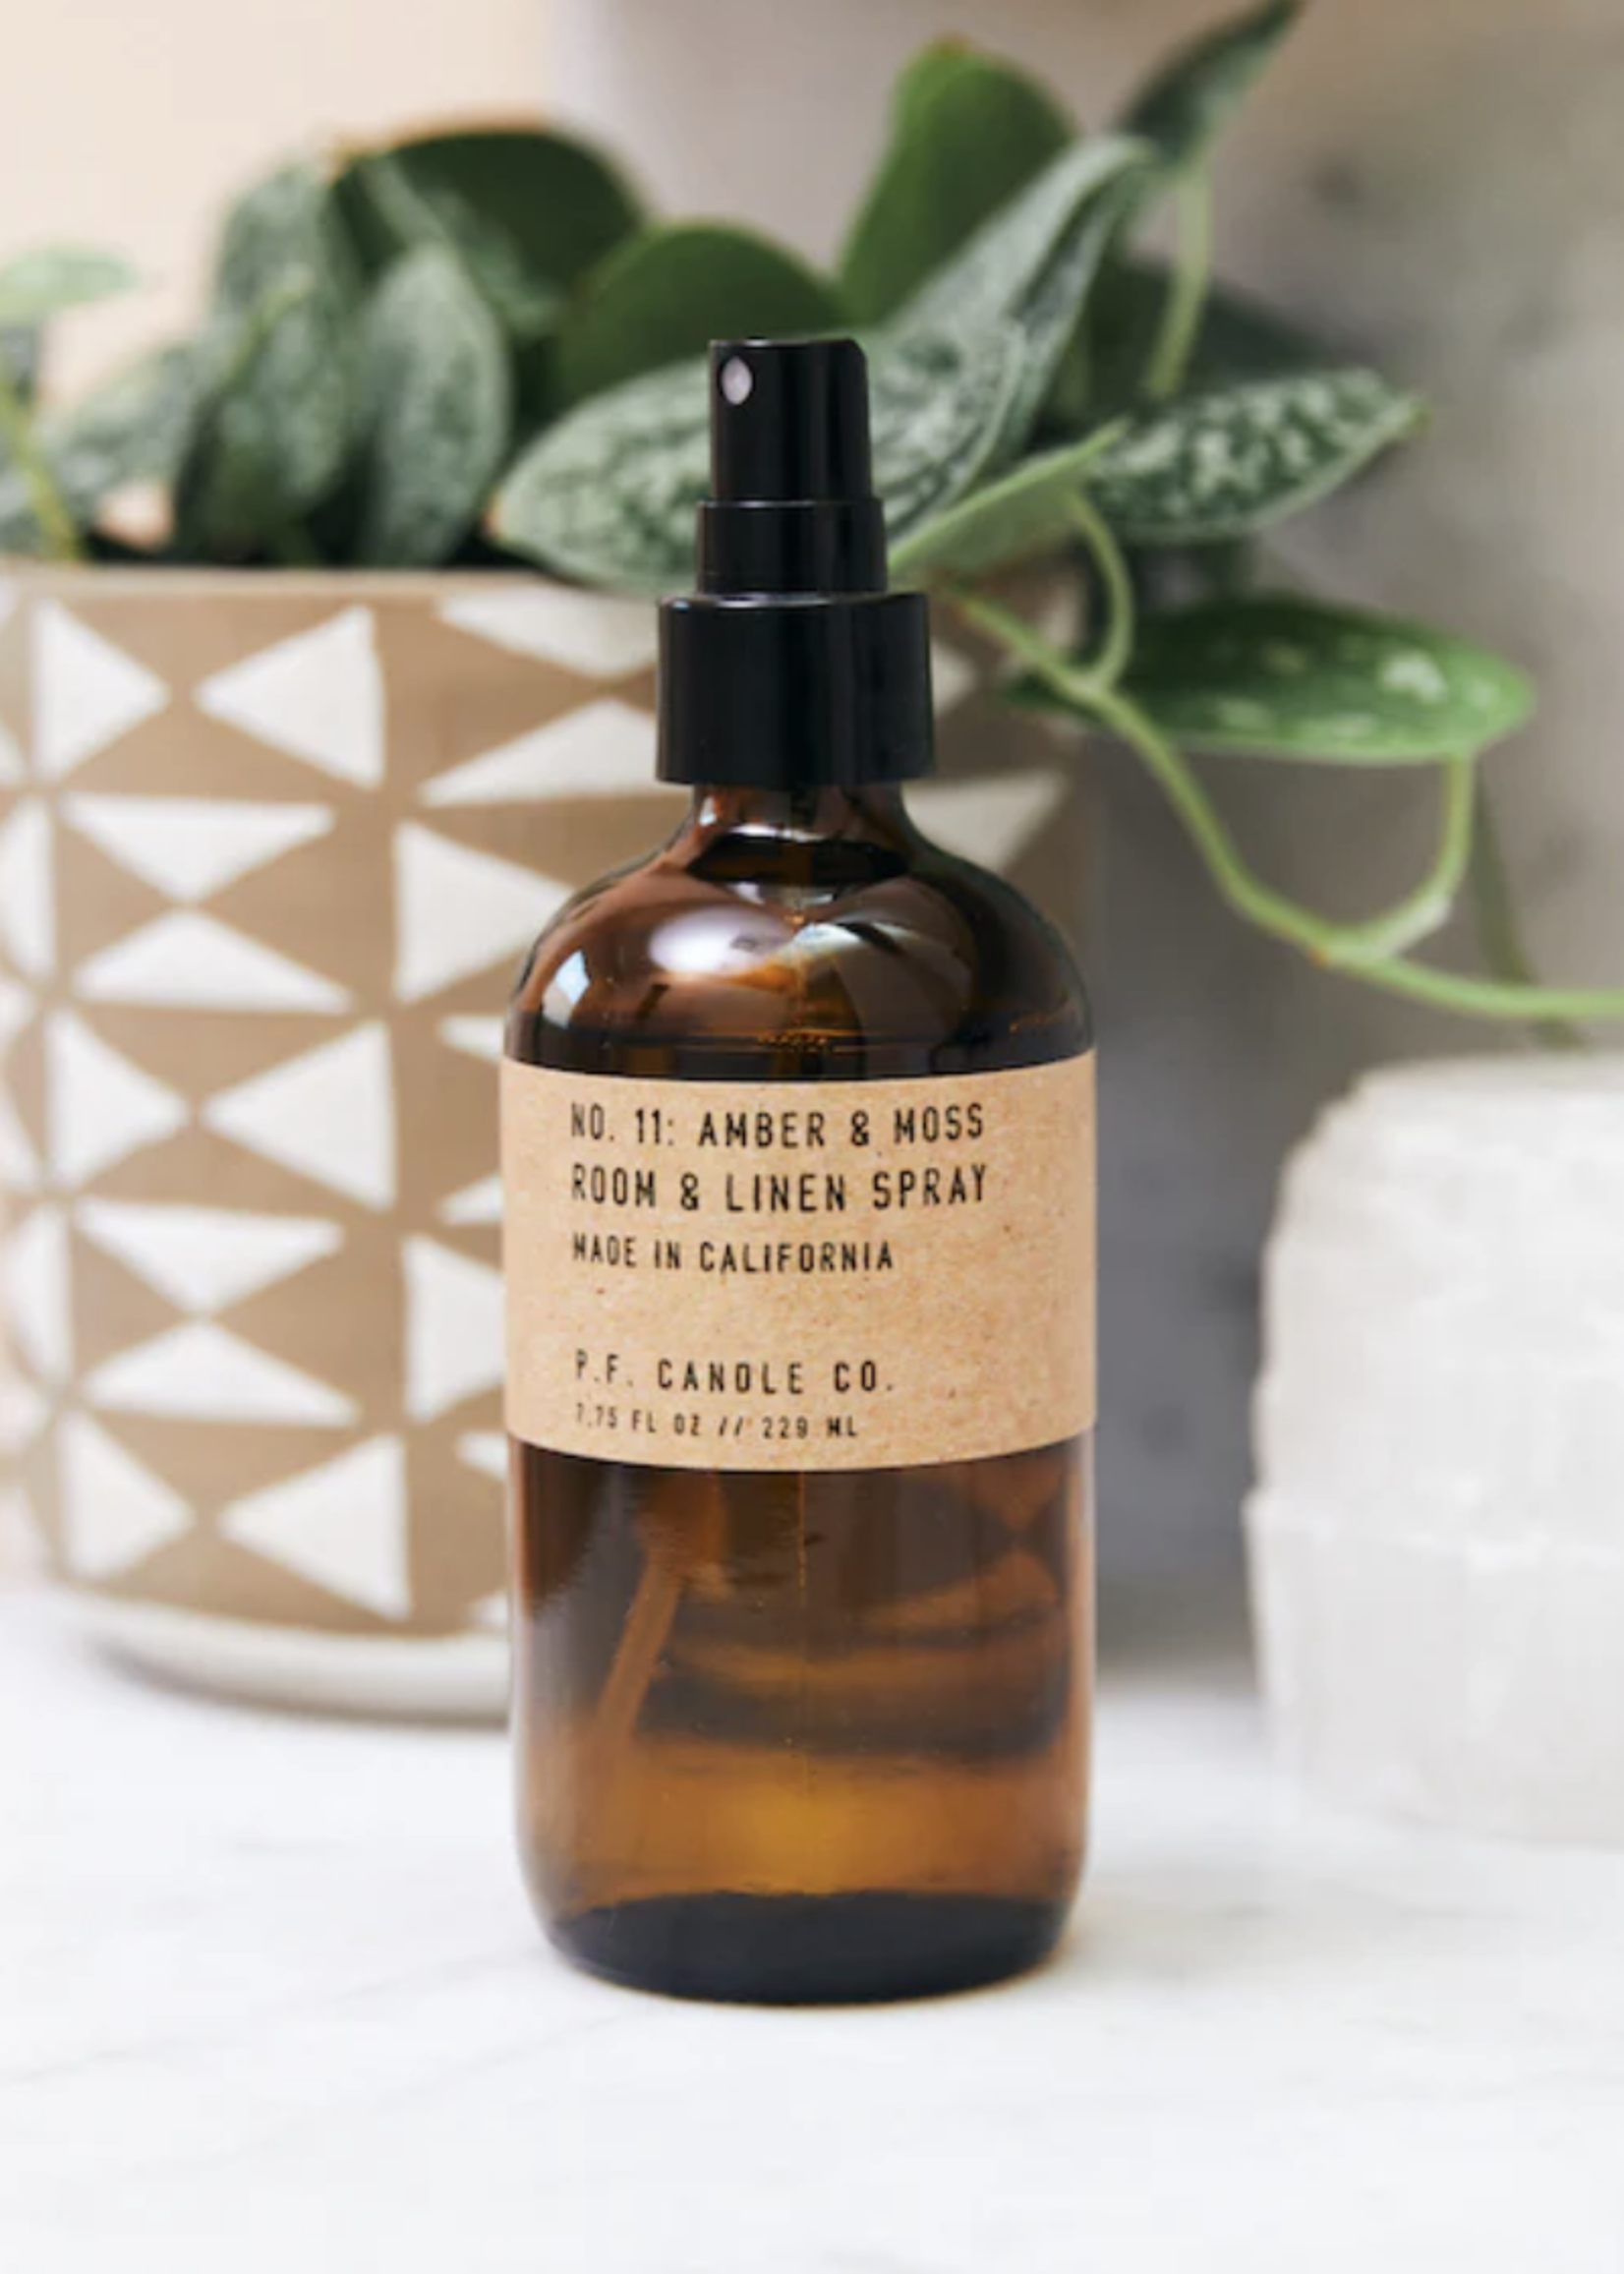 P.F. Candle Co Room & Linen Spray | Amber & Moss